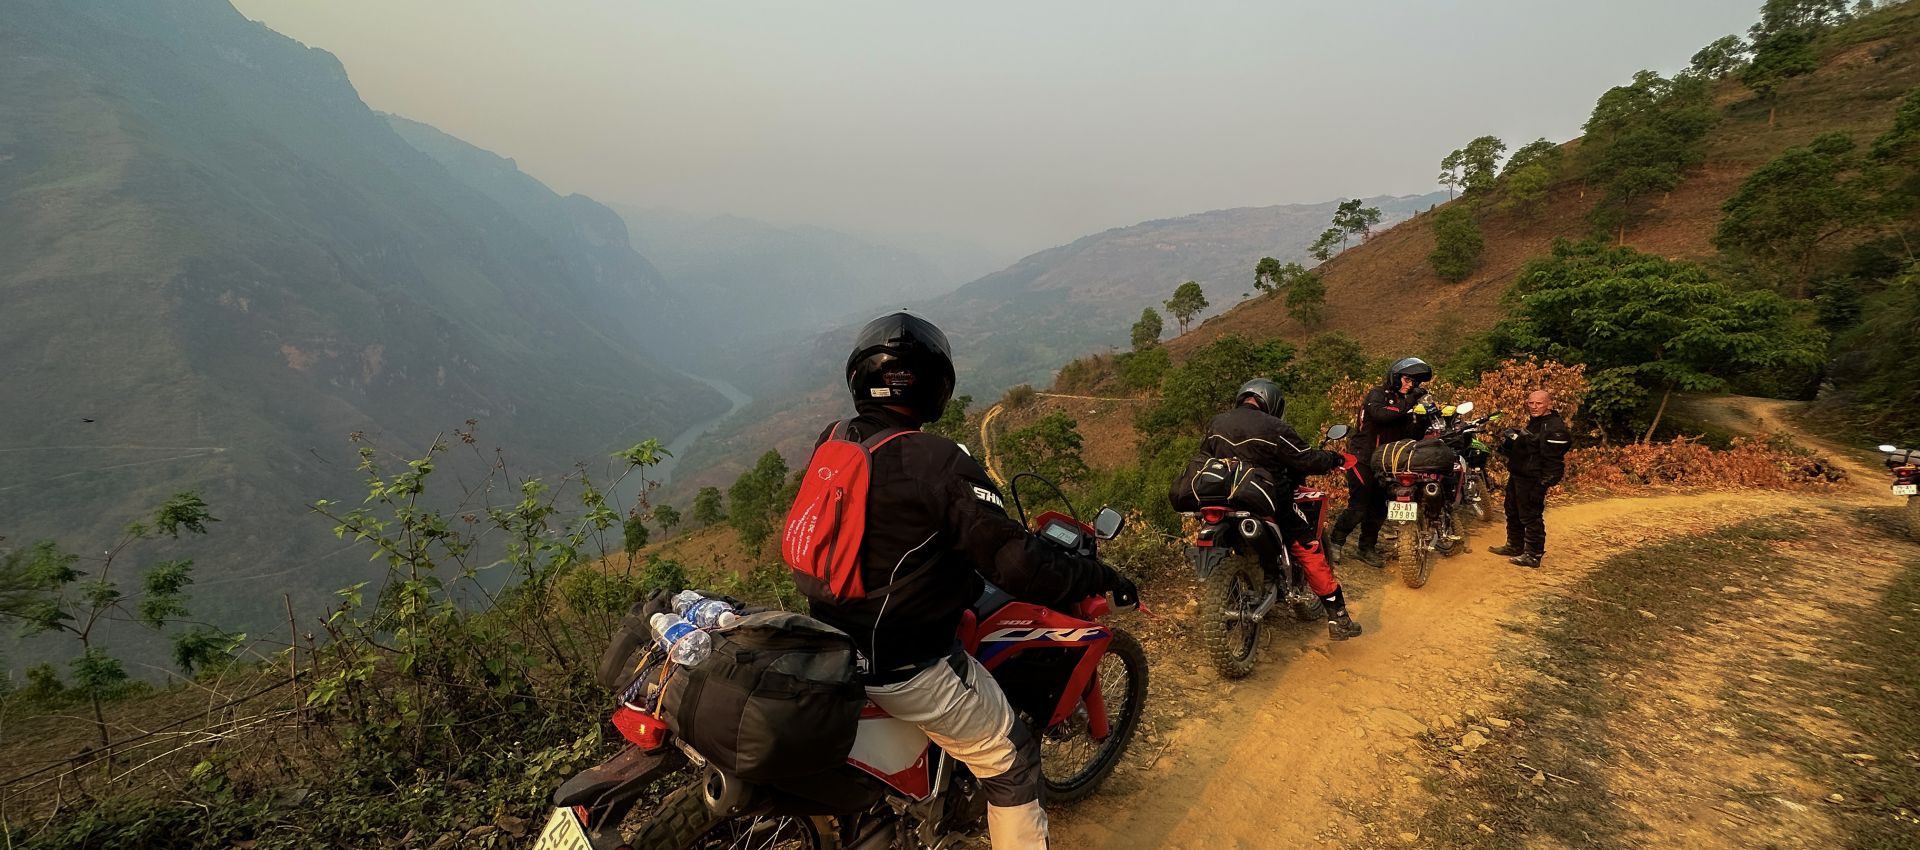 Unforgettable 11-Day Motorbike Tour: Explore The Highlights Of Northwest And Central Vietnam